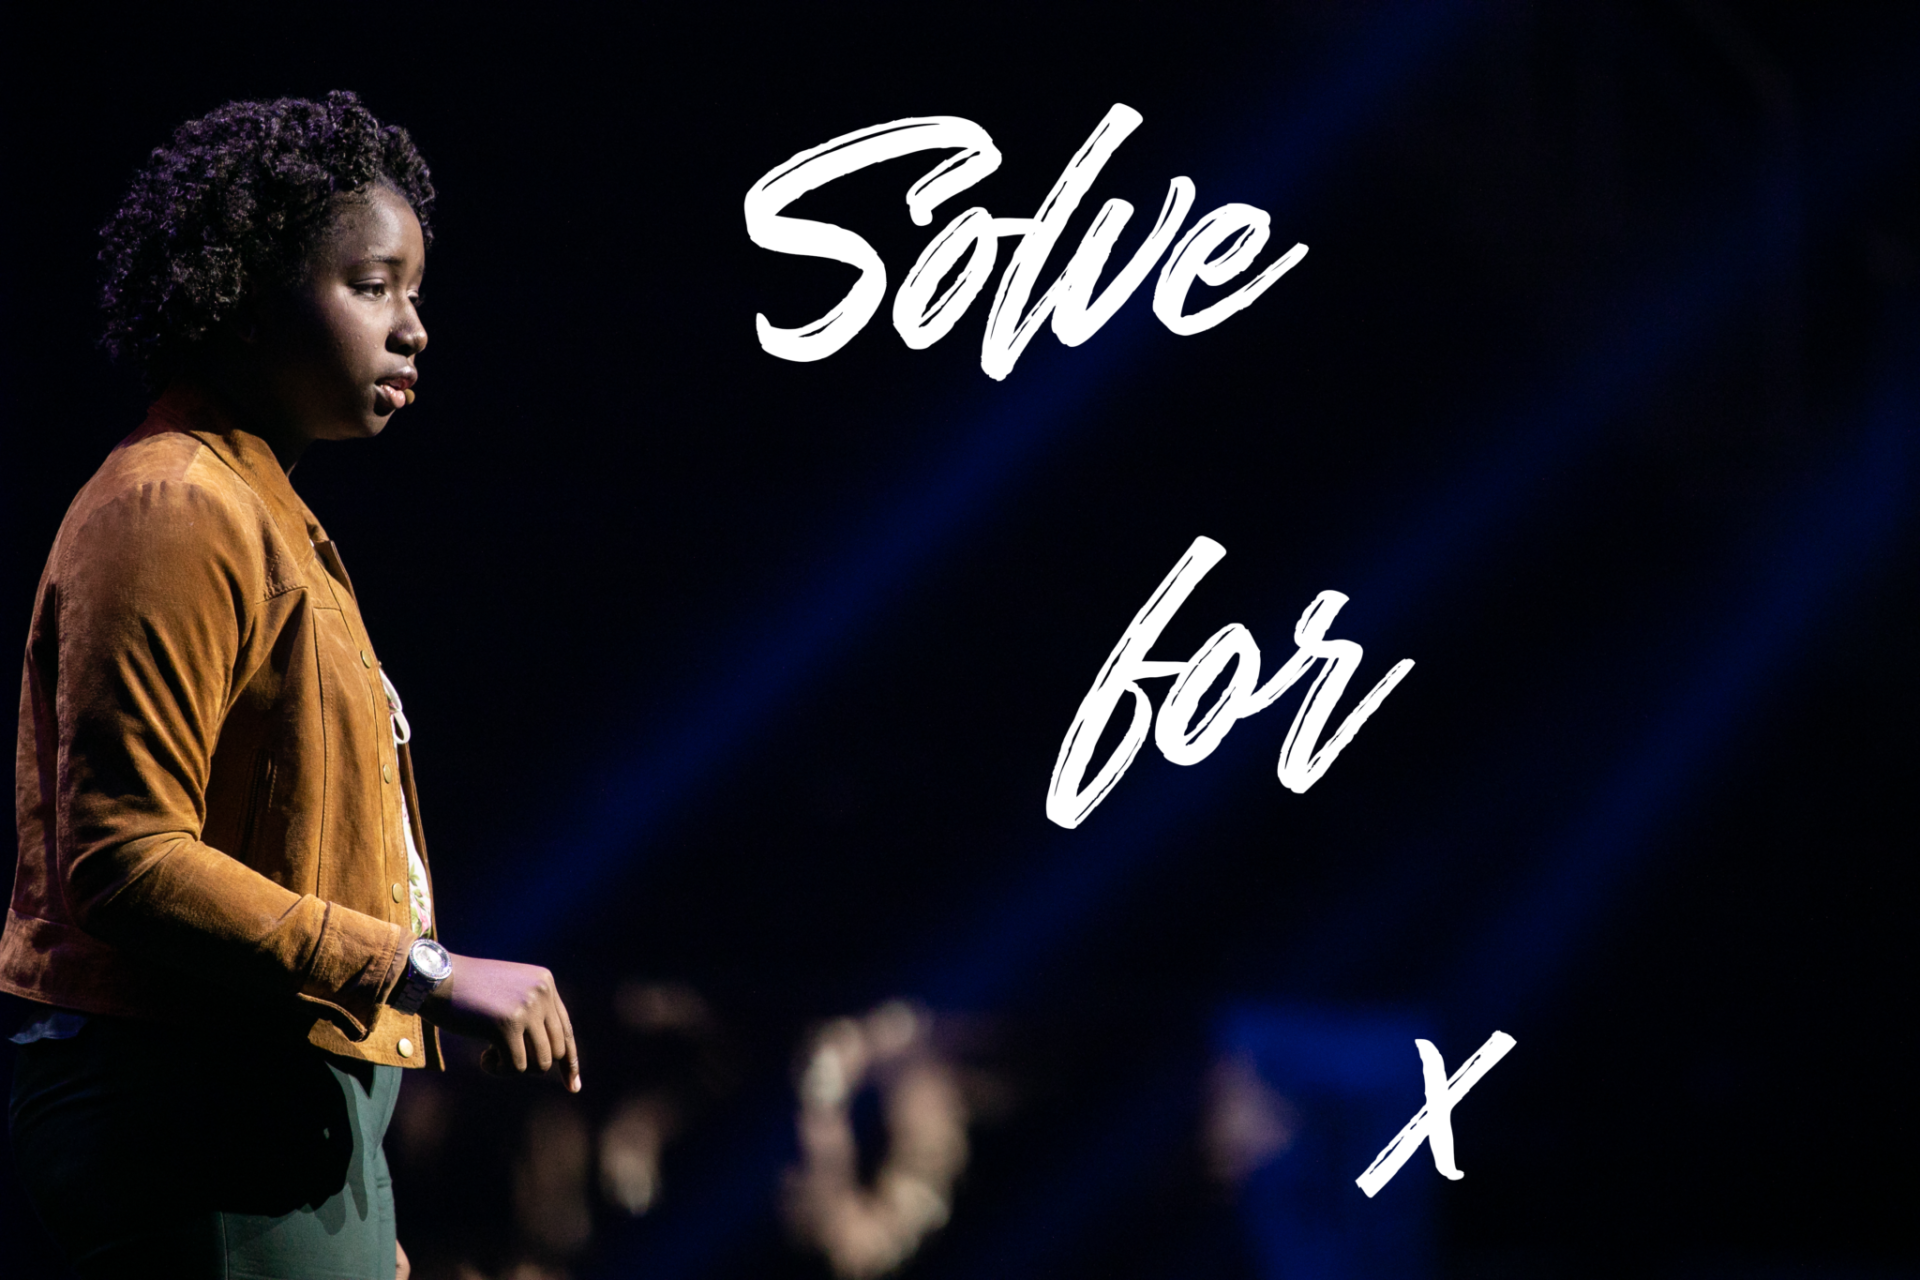 „solve for x“ — Empowering Poem Performed at GHC 18 Keynote